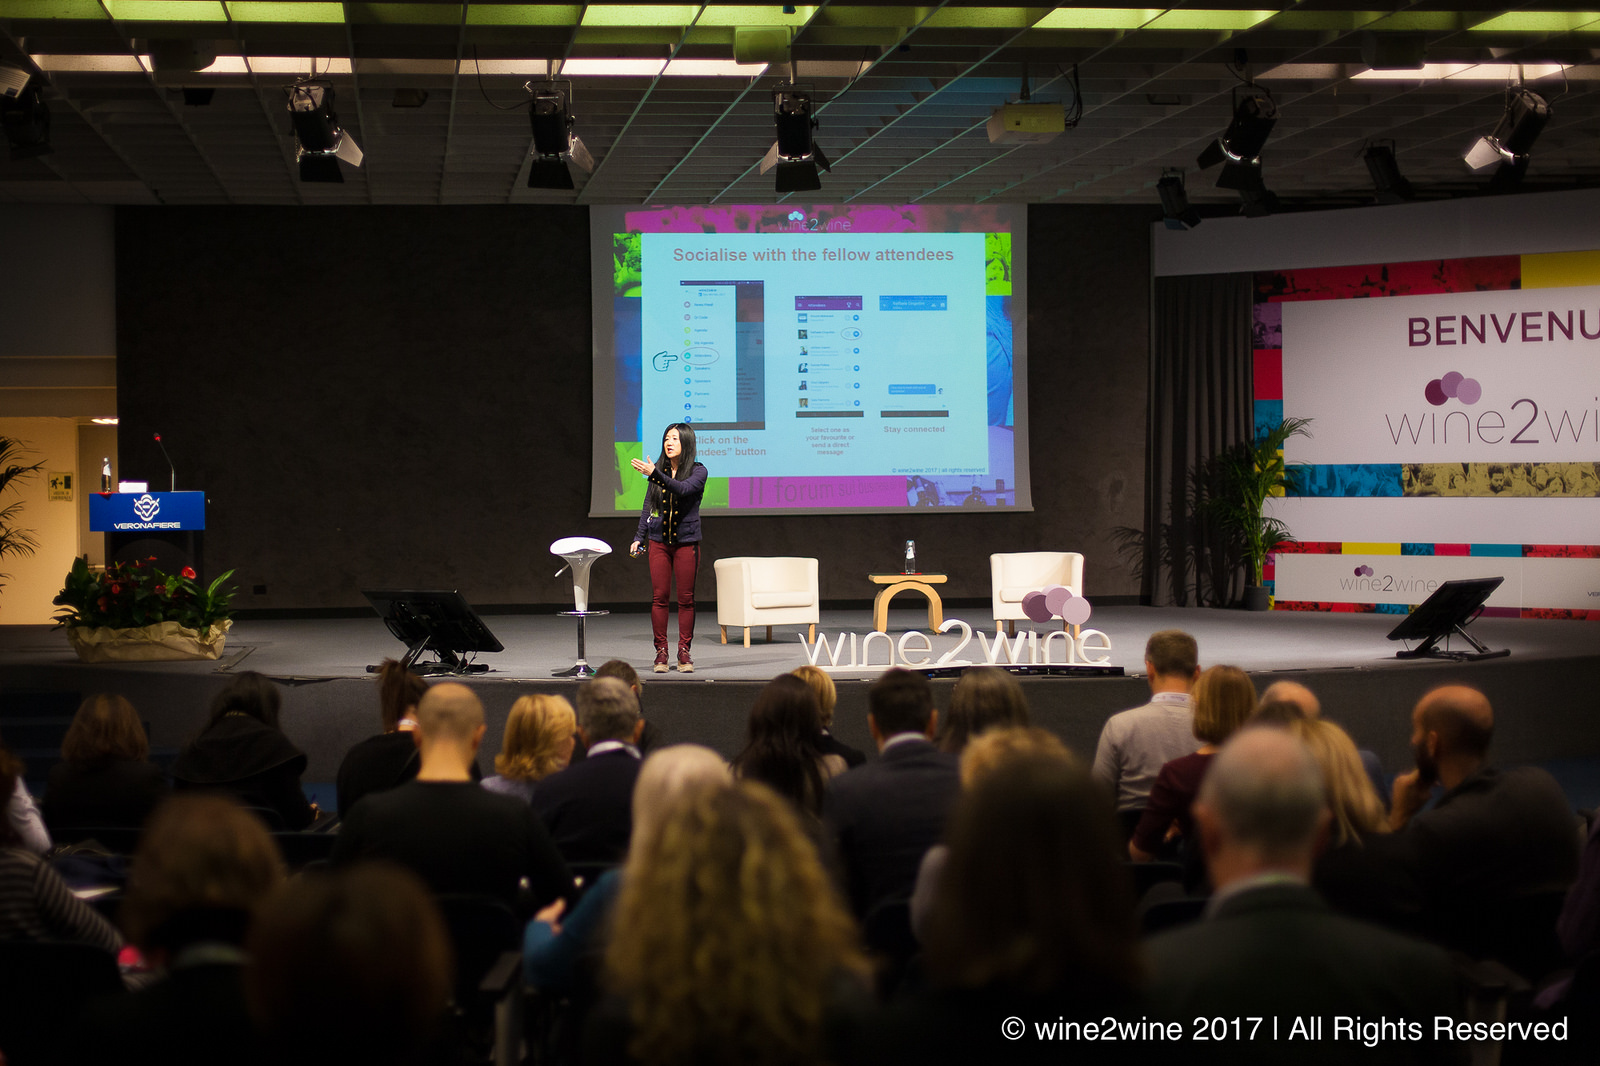 Photograph: On stage Stevie Kim, Managing Director of Vinitaly International, at the opening session of wine2wine 2017 in Veronafiere’s PalaExpo.